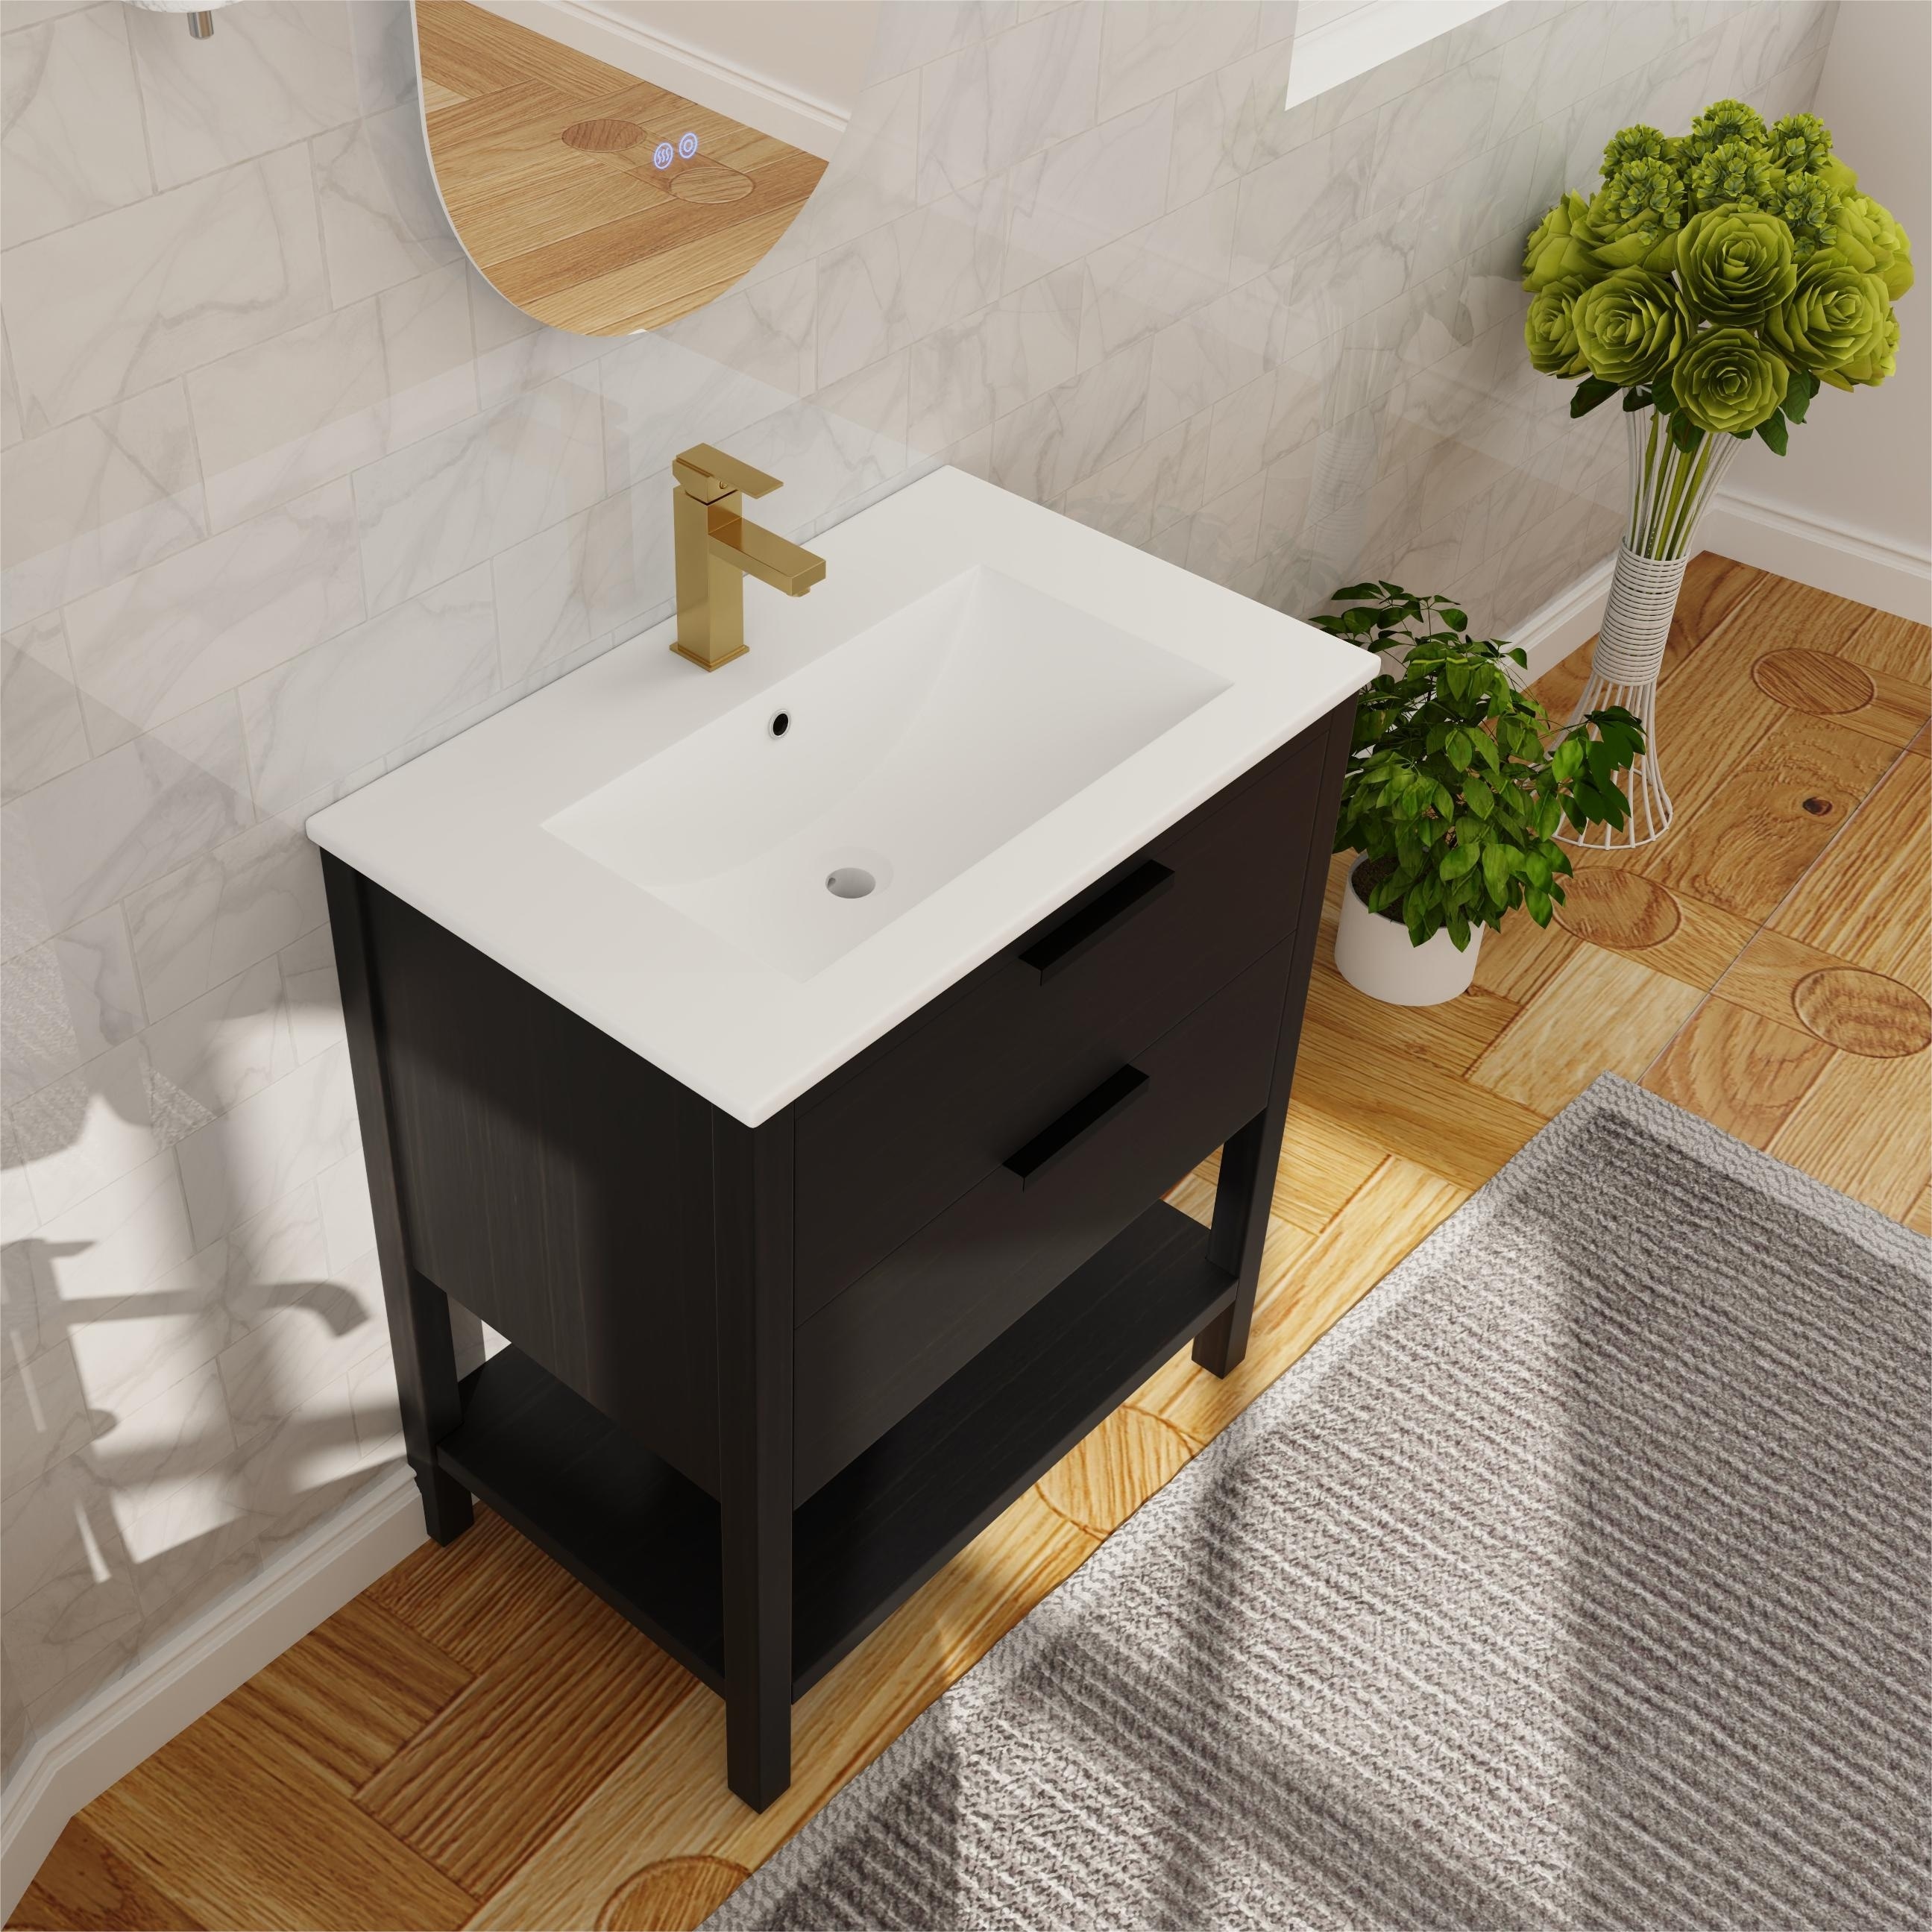 https://ak1.ostkcdn.com/images/products/is/images/direct/ead23b47f48434743e5c1930a99c89c3db0c5848/Beingnext-30%22-Bathroom-Vanity-with-Sink%2C-Single-Sink-Freestanding-Bathroom-Vanity-with-2-Soft-Close-Drawers.jpg